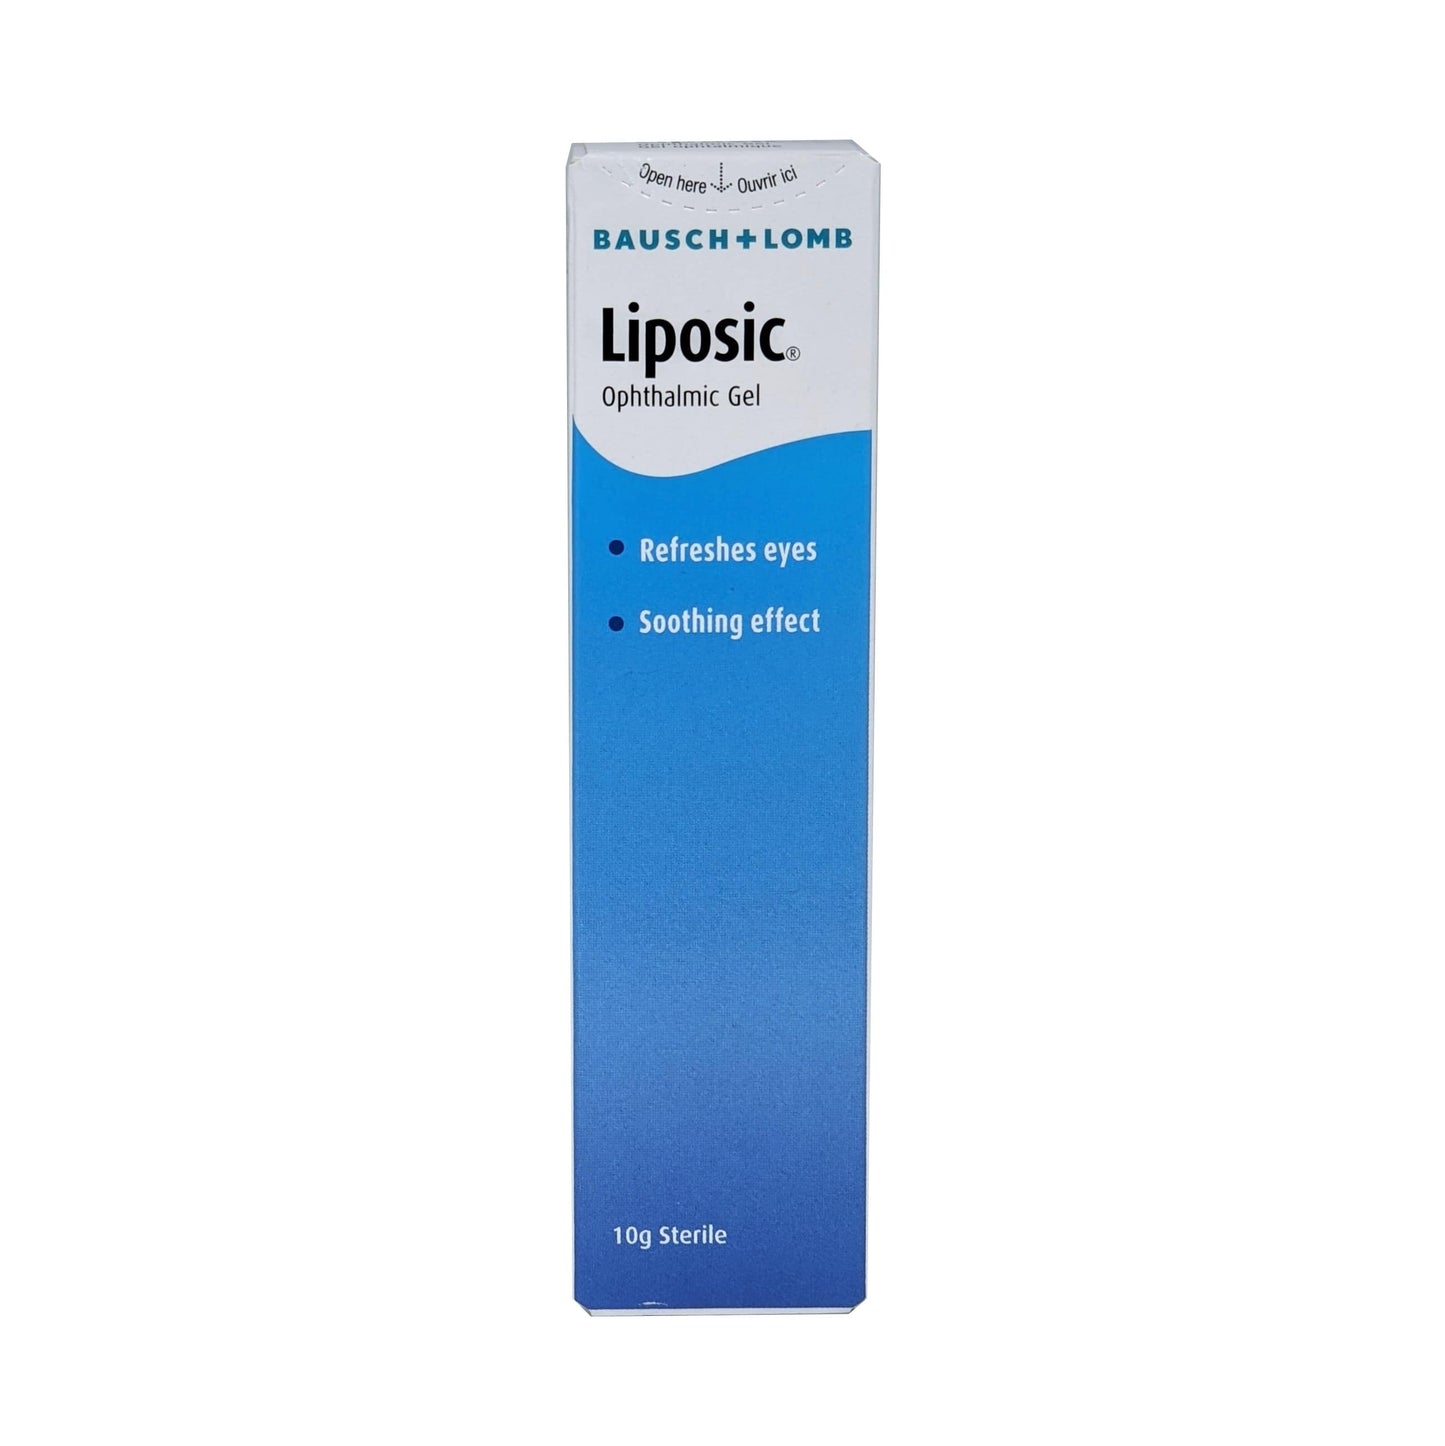 Product label for Bausch & Lomb Liposic Ophthalmic Gel (10g) 1 of 2